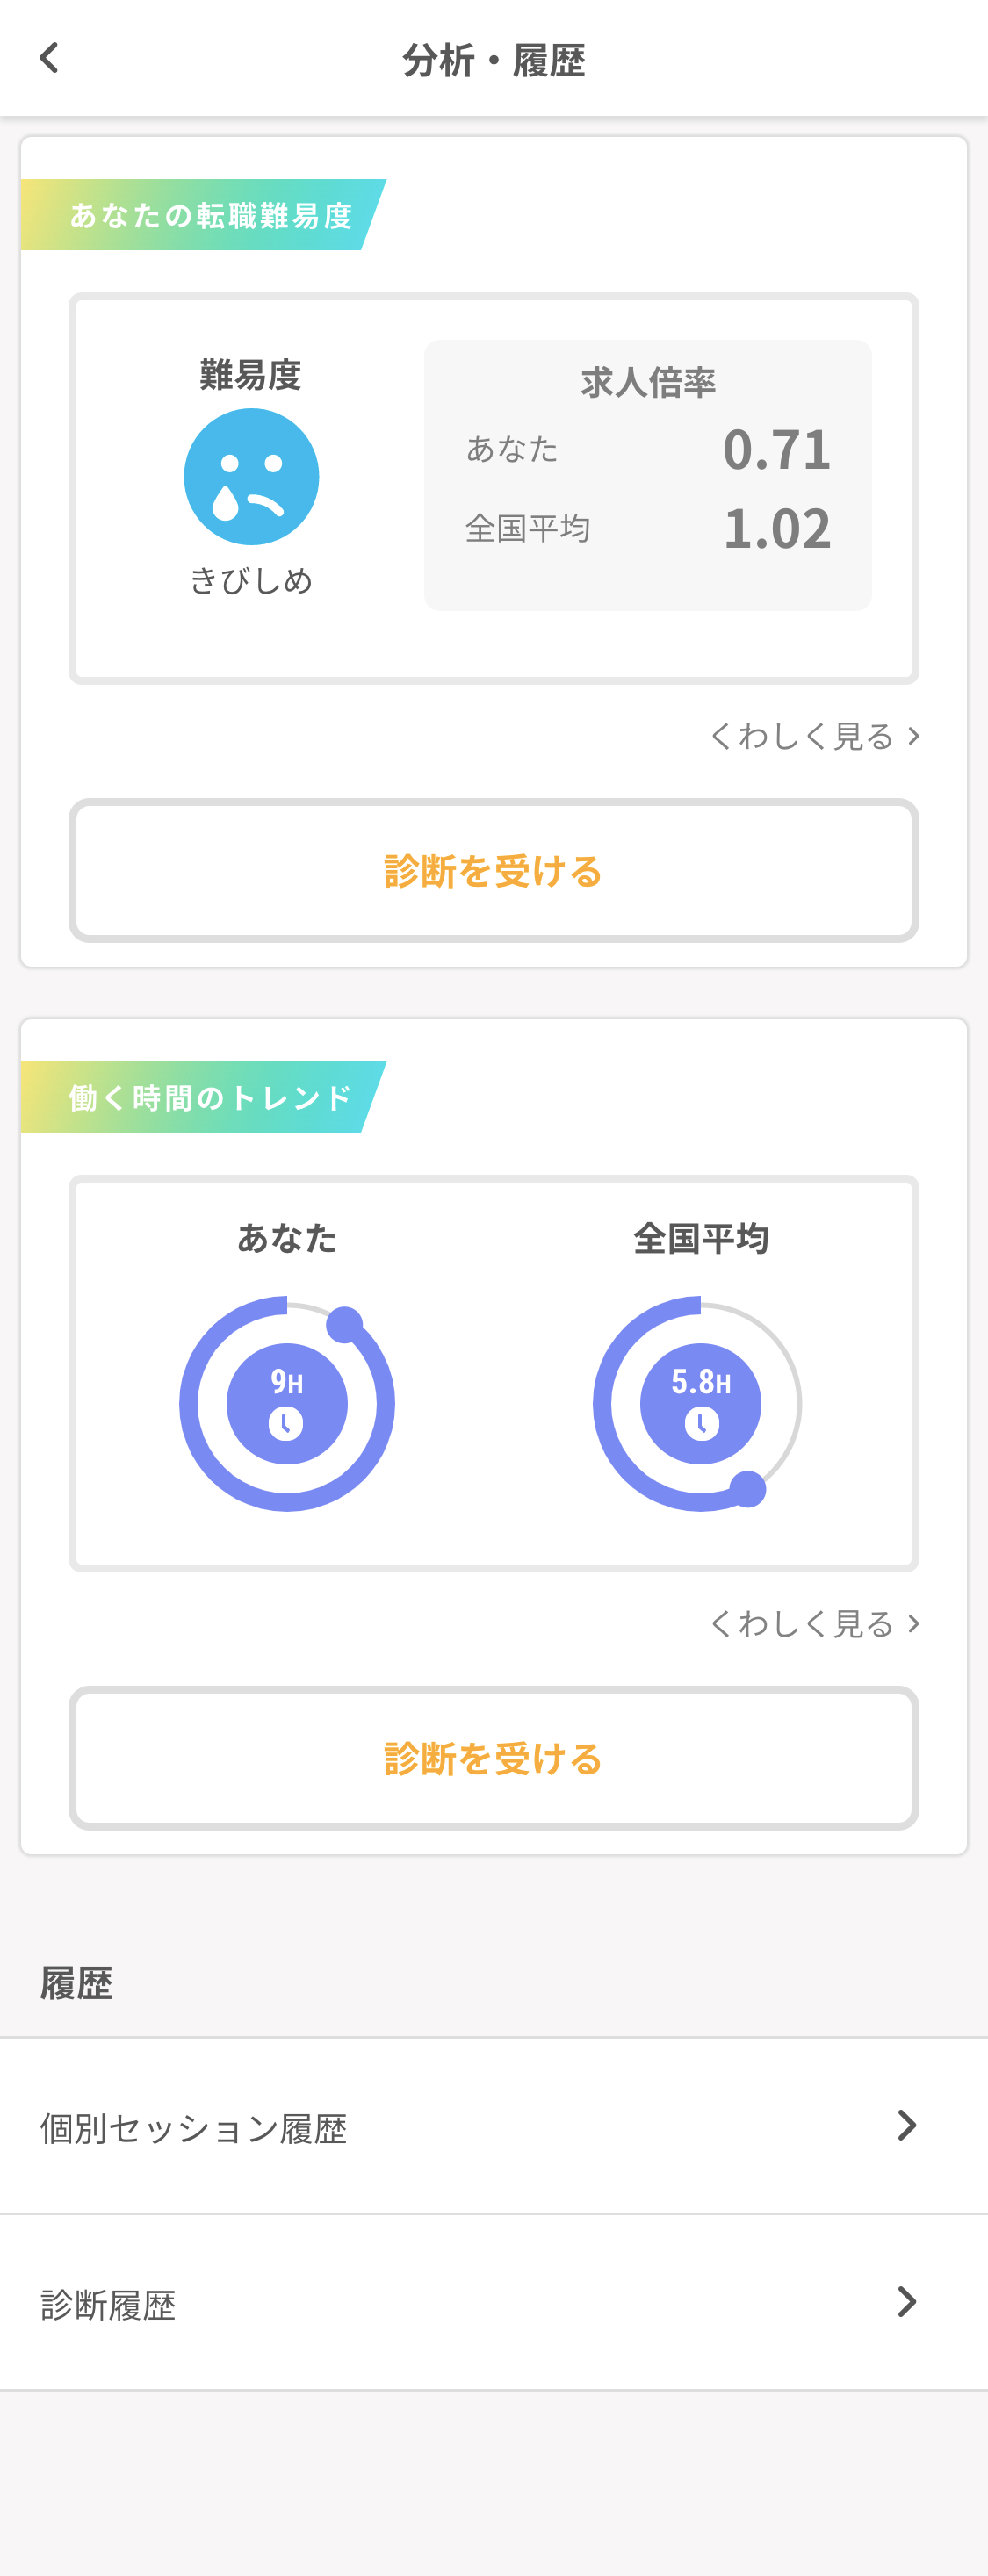 prismy.jp_profile_analysis_iPhone_X_.png